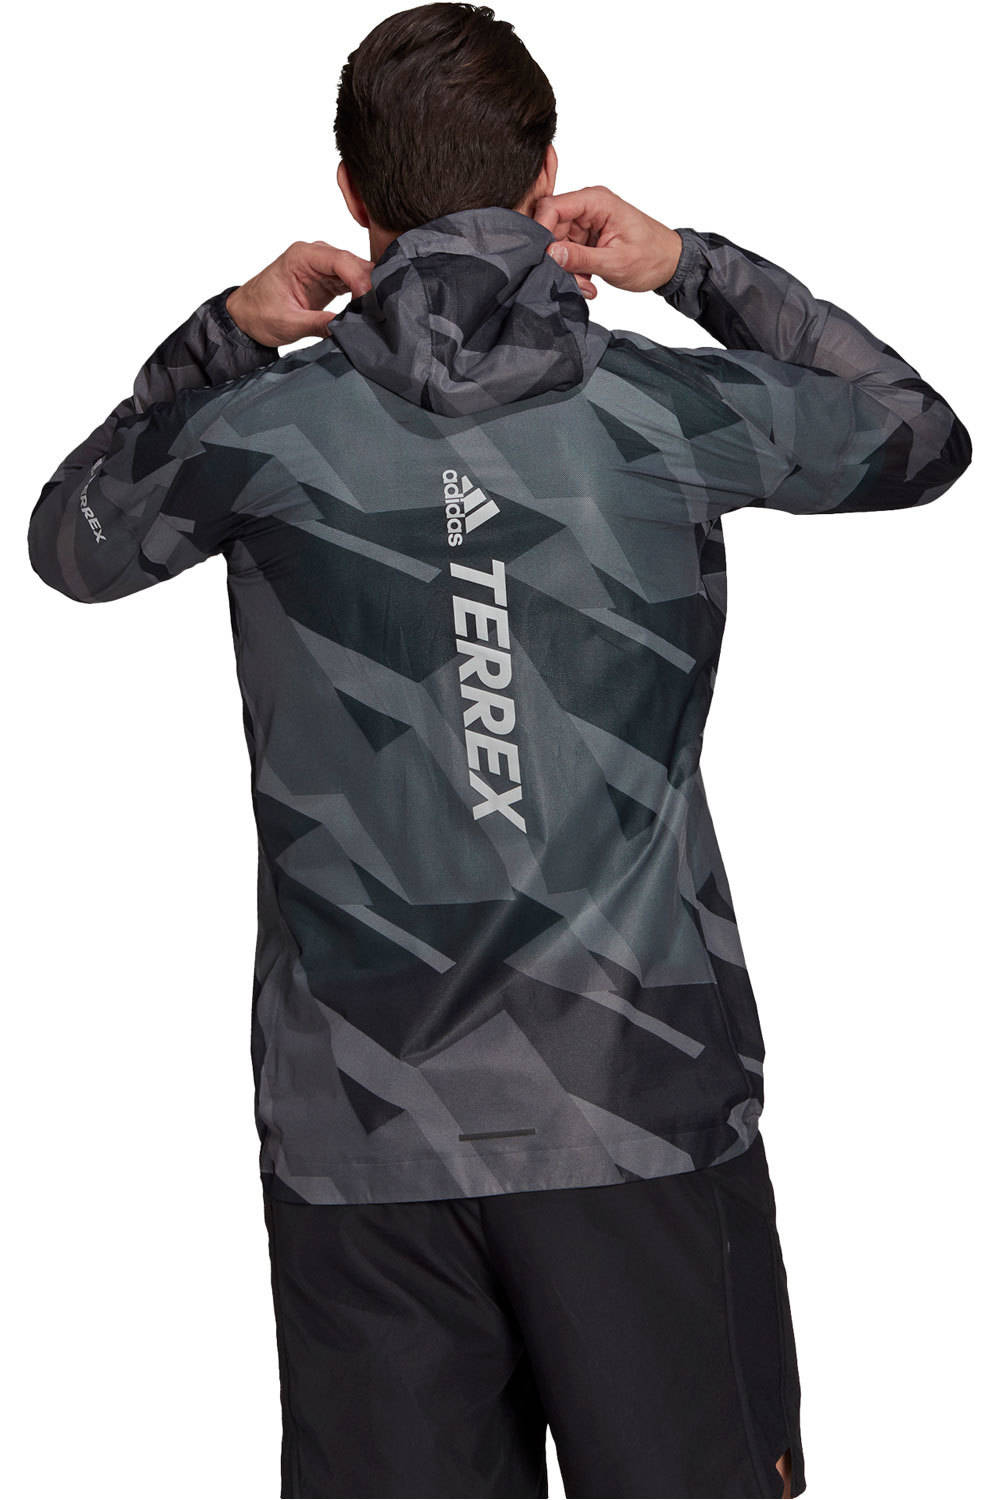 adidas CHAQUETA TRAIL RUNNING HOMBRE Terrex Agravic Graphic 2.5 Layer (impermeable) vista trasera